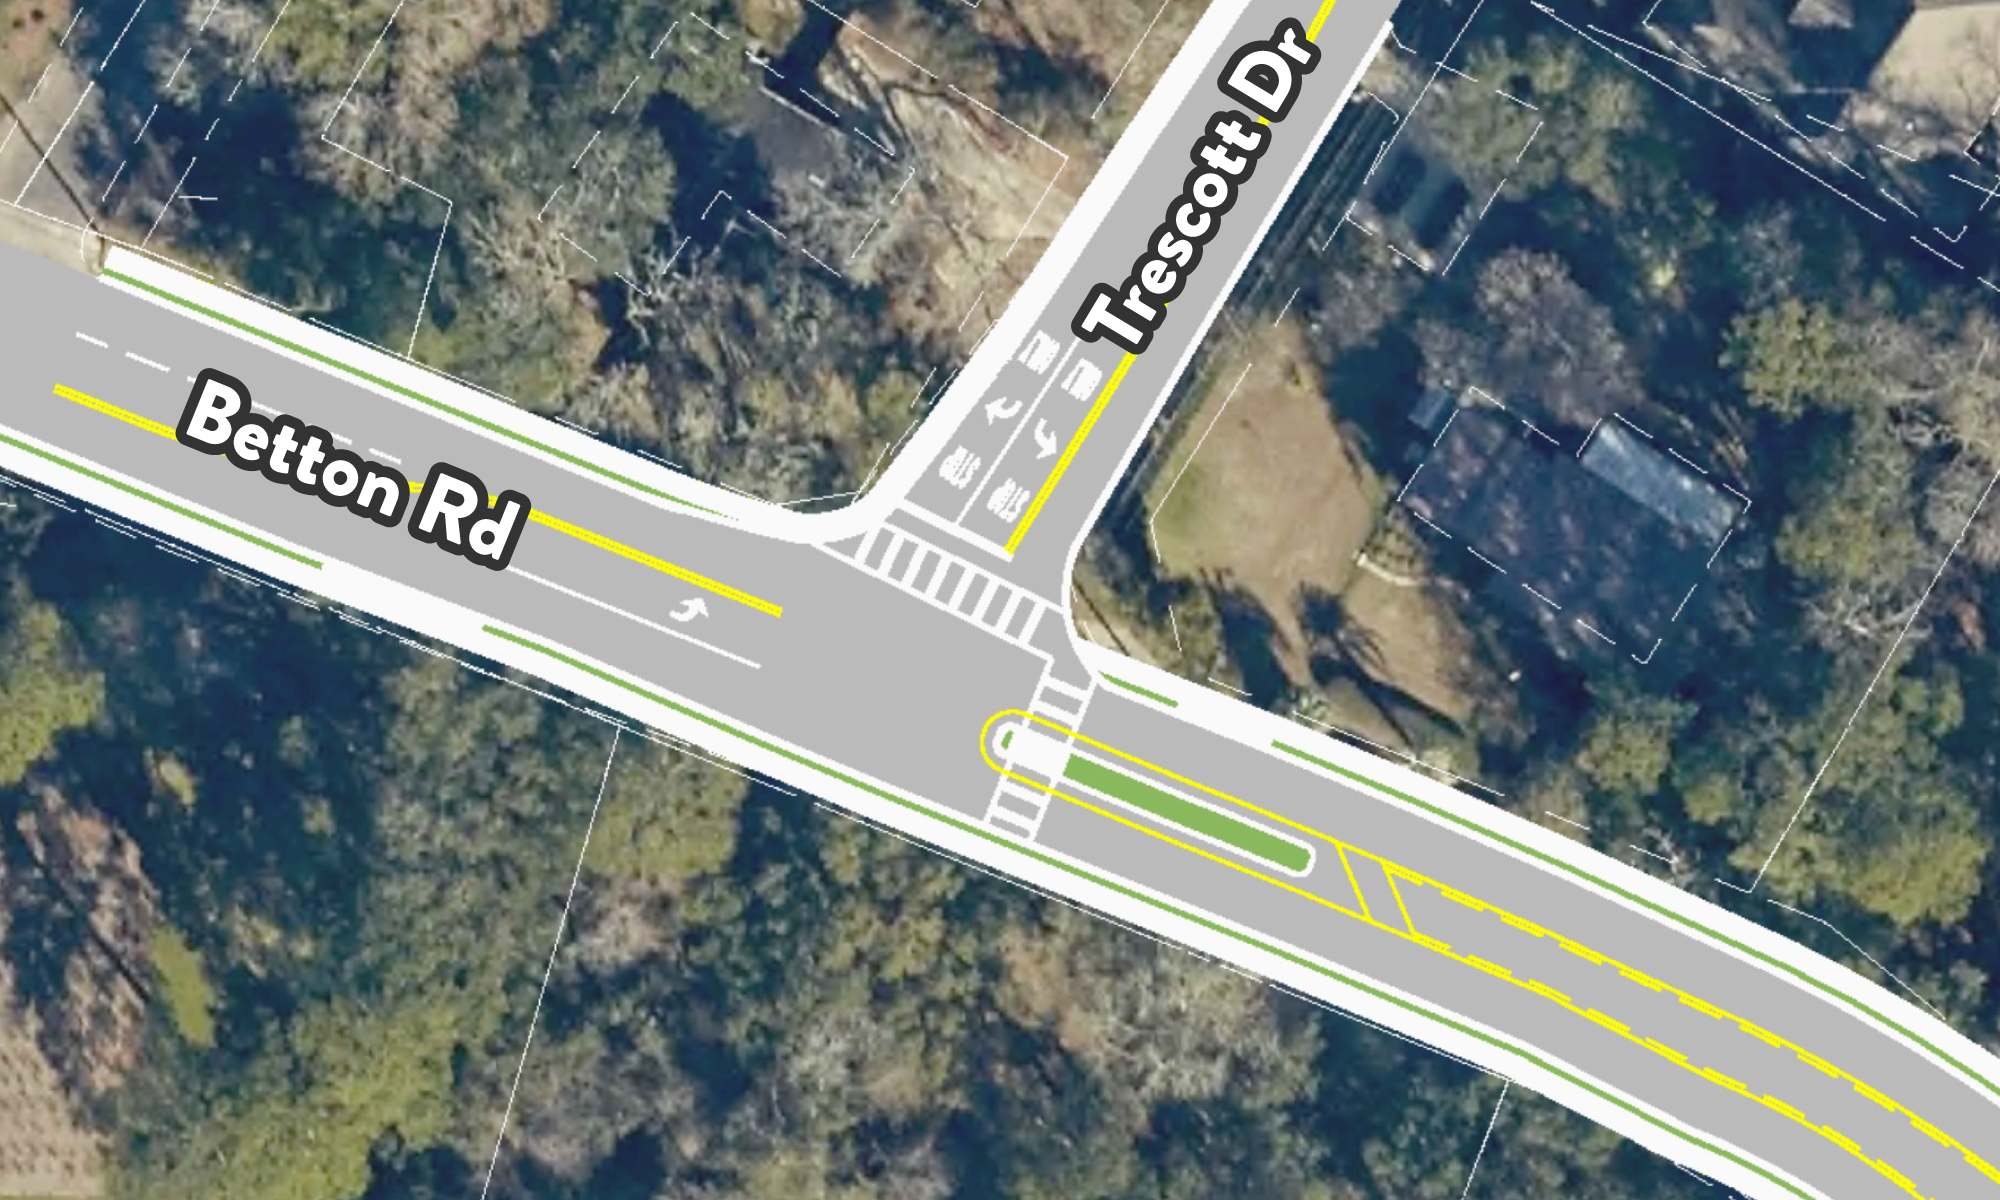 A plan view of one of the intersection upgrades.